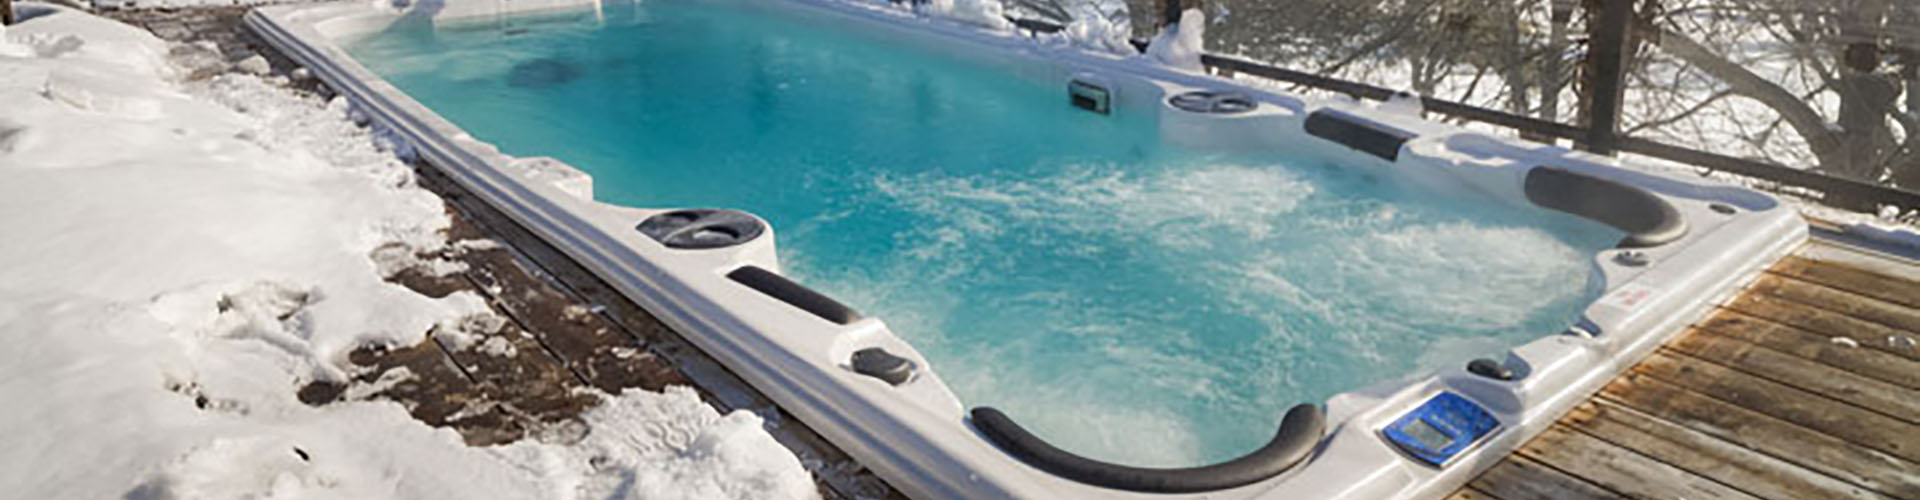 Can You Use an Exercise Pool in Winter?